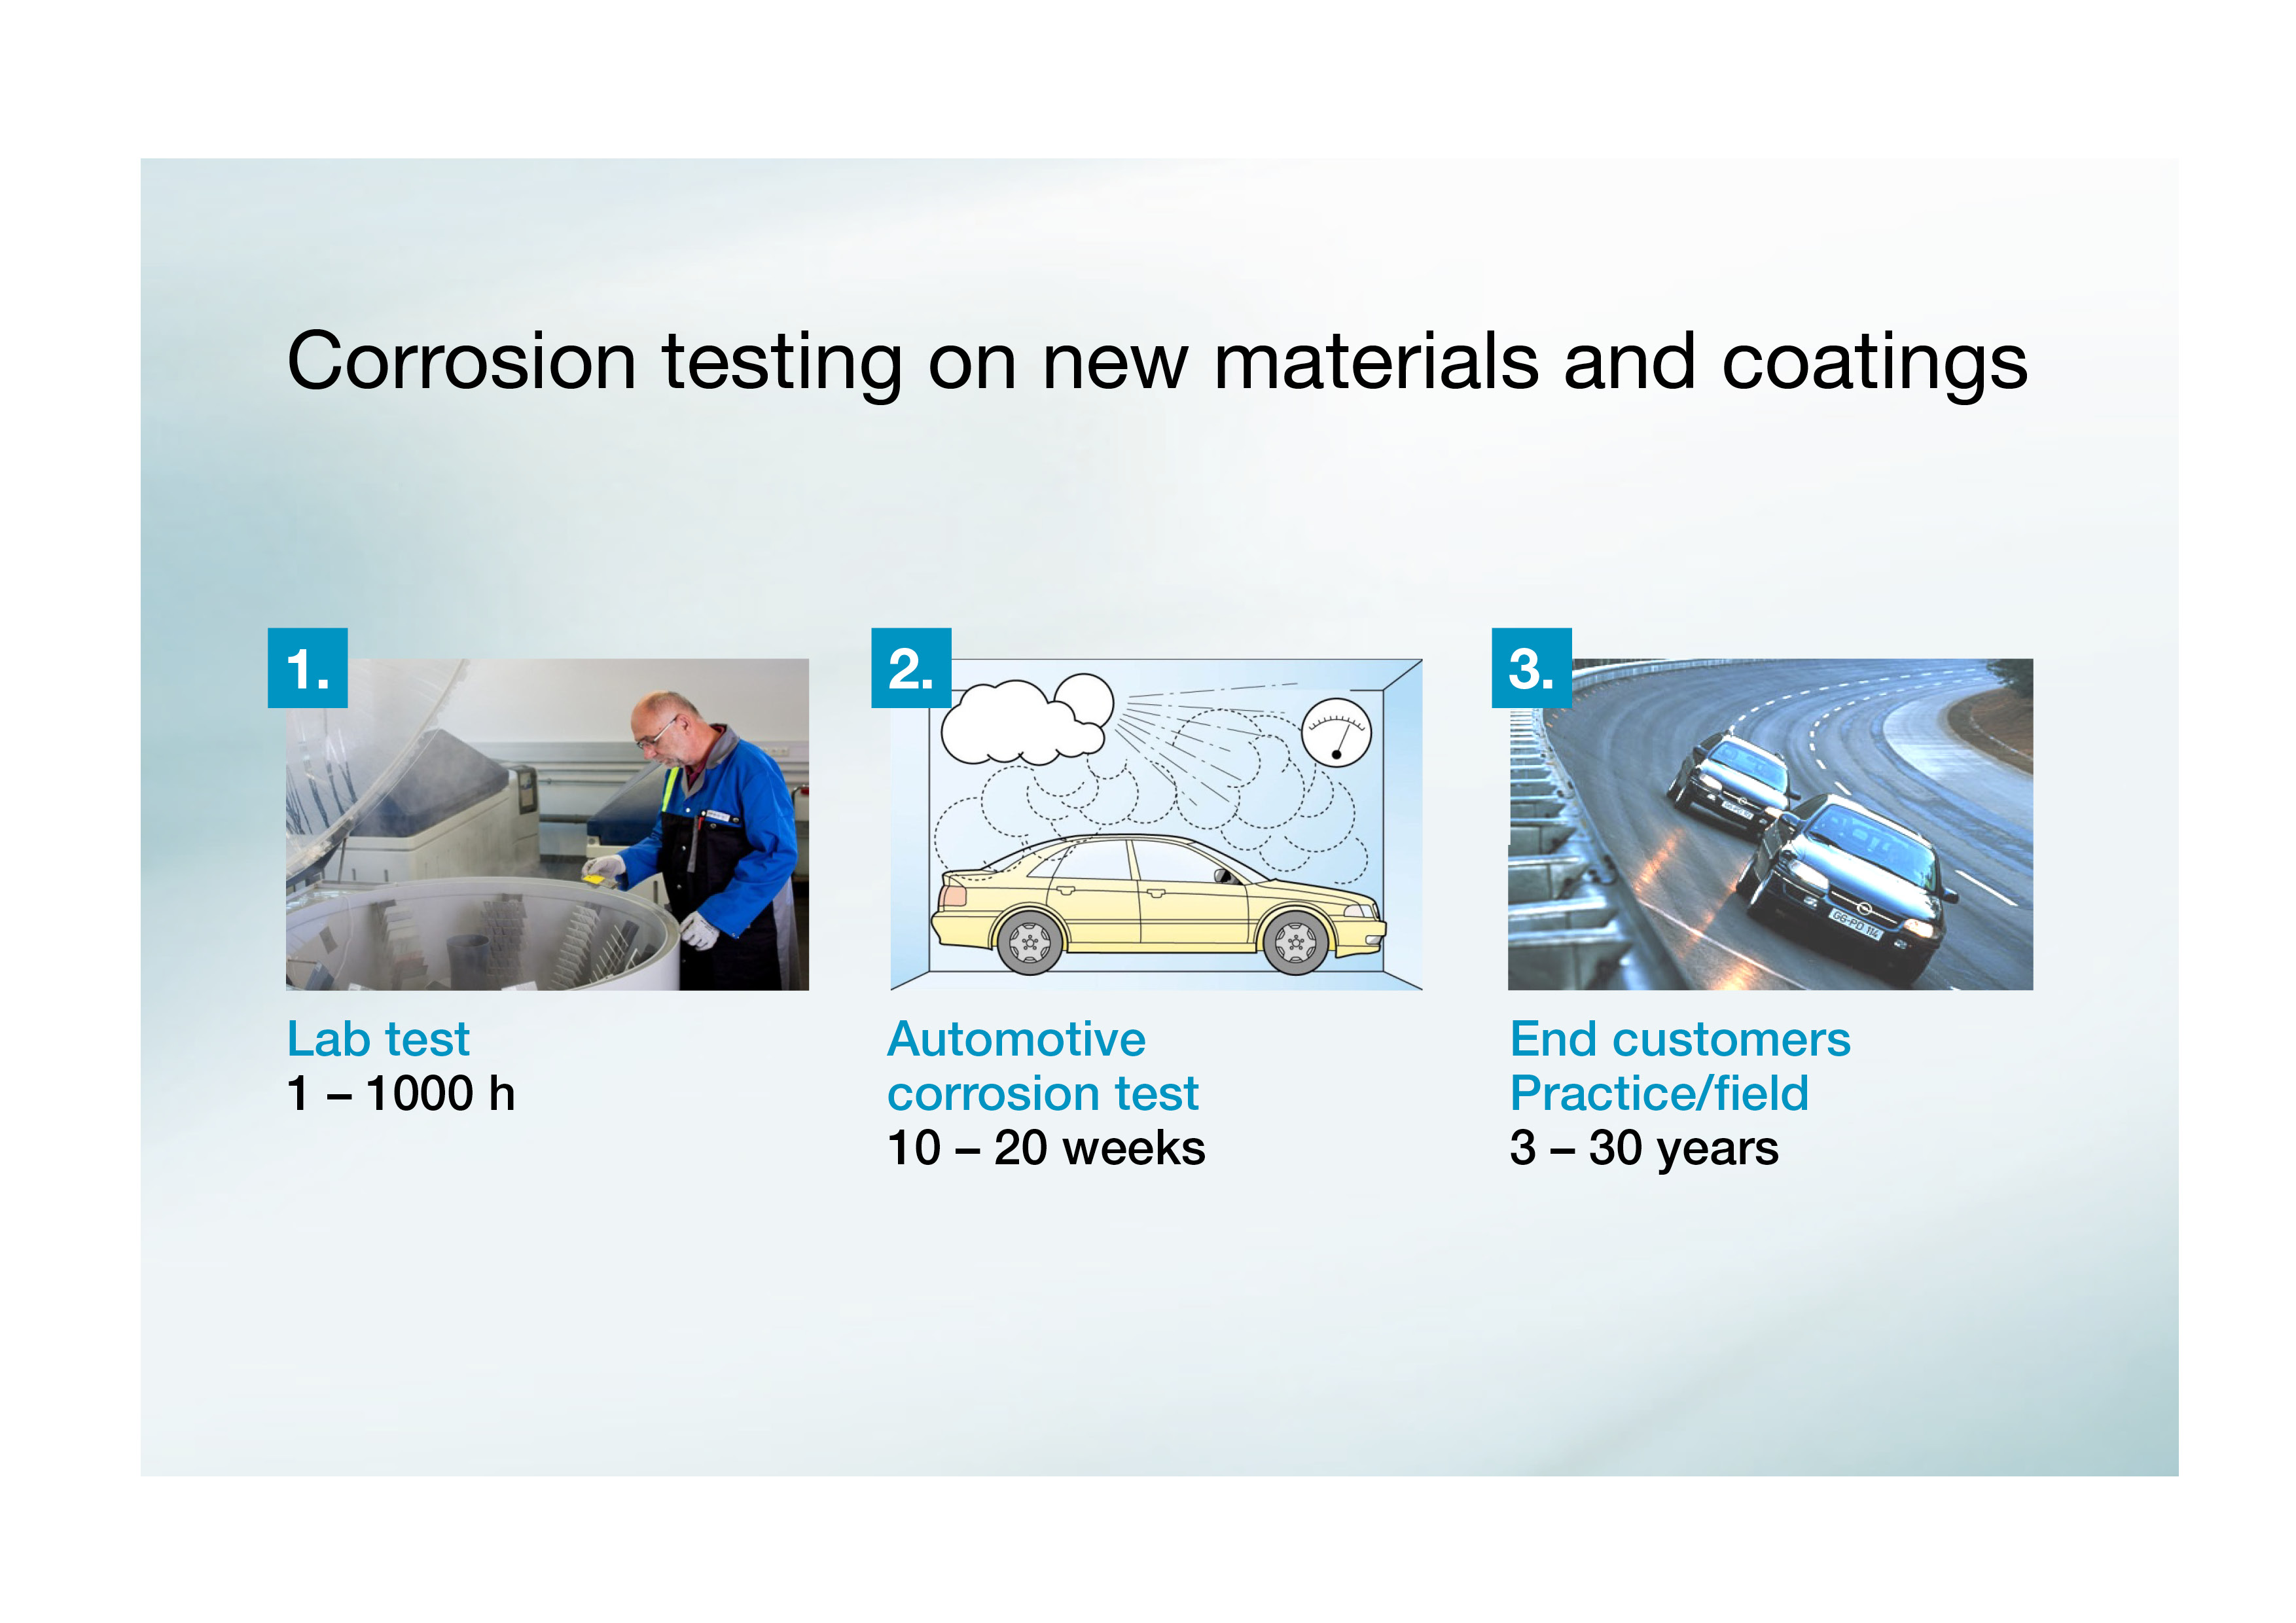 Duration of corrosion testing for new materials and coatings